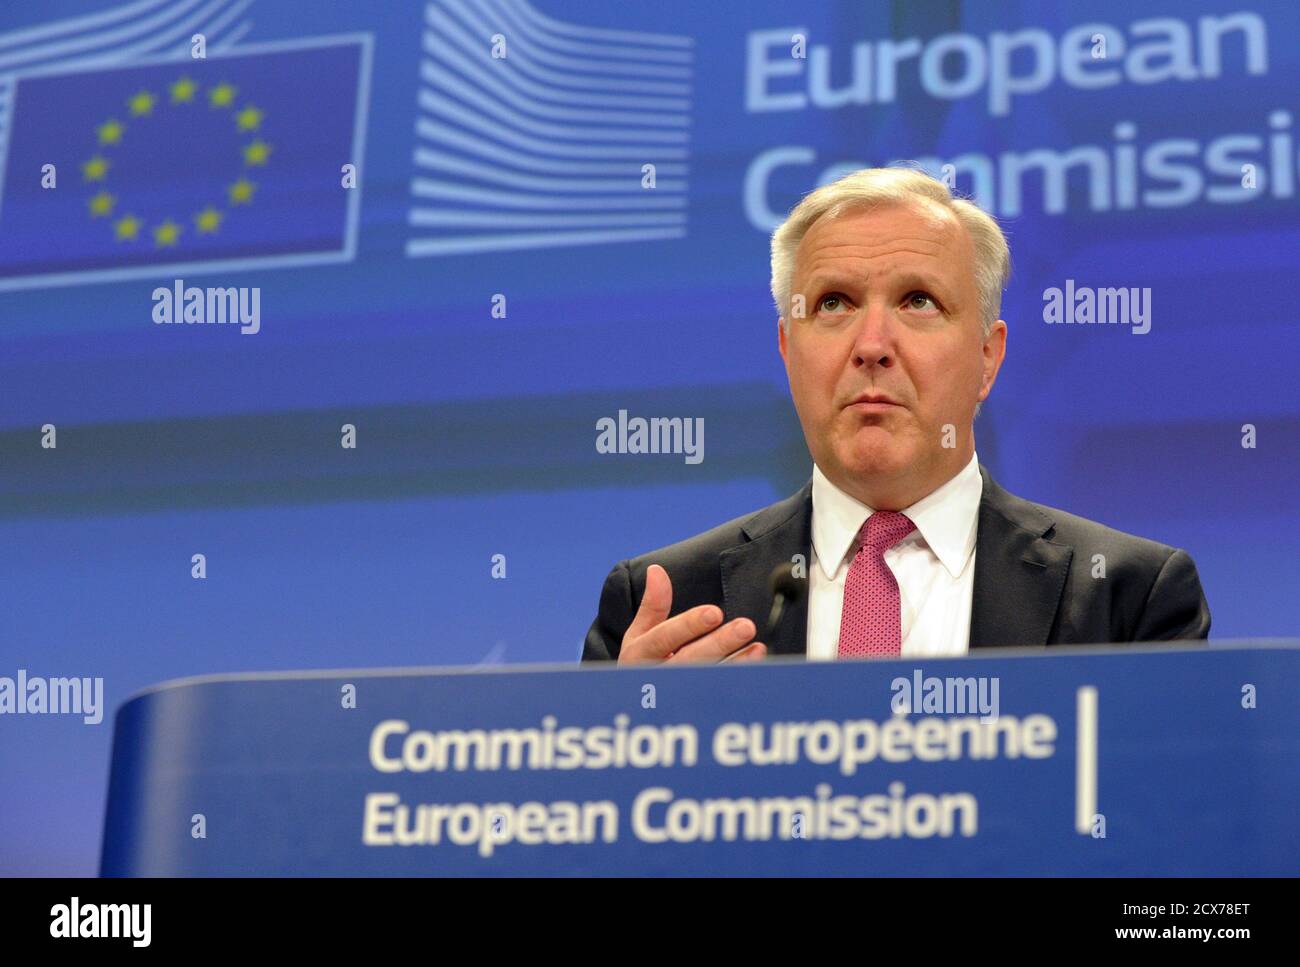 European Economic and Monetary Affairs Commissioner Olli Rehn attends a news conference about the convergence report for Latvia at the European Commision in Brussels June 5, 2013.   REUTERS/Laurent Dubrule    (BELGIUM - Tags: POLITICS BUSINESS) Stock Photo